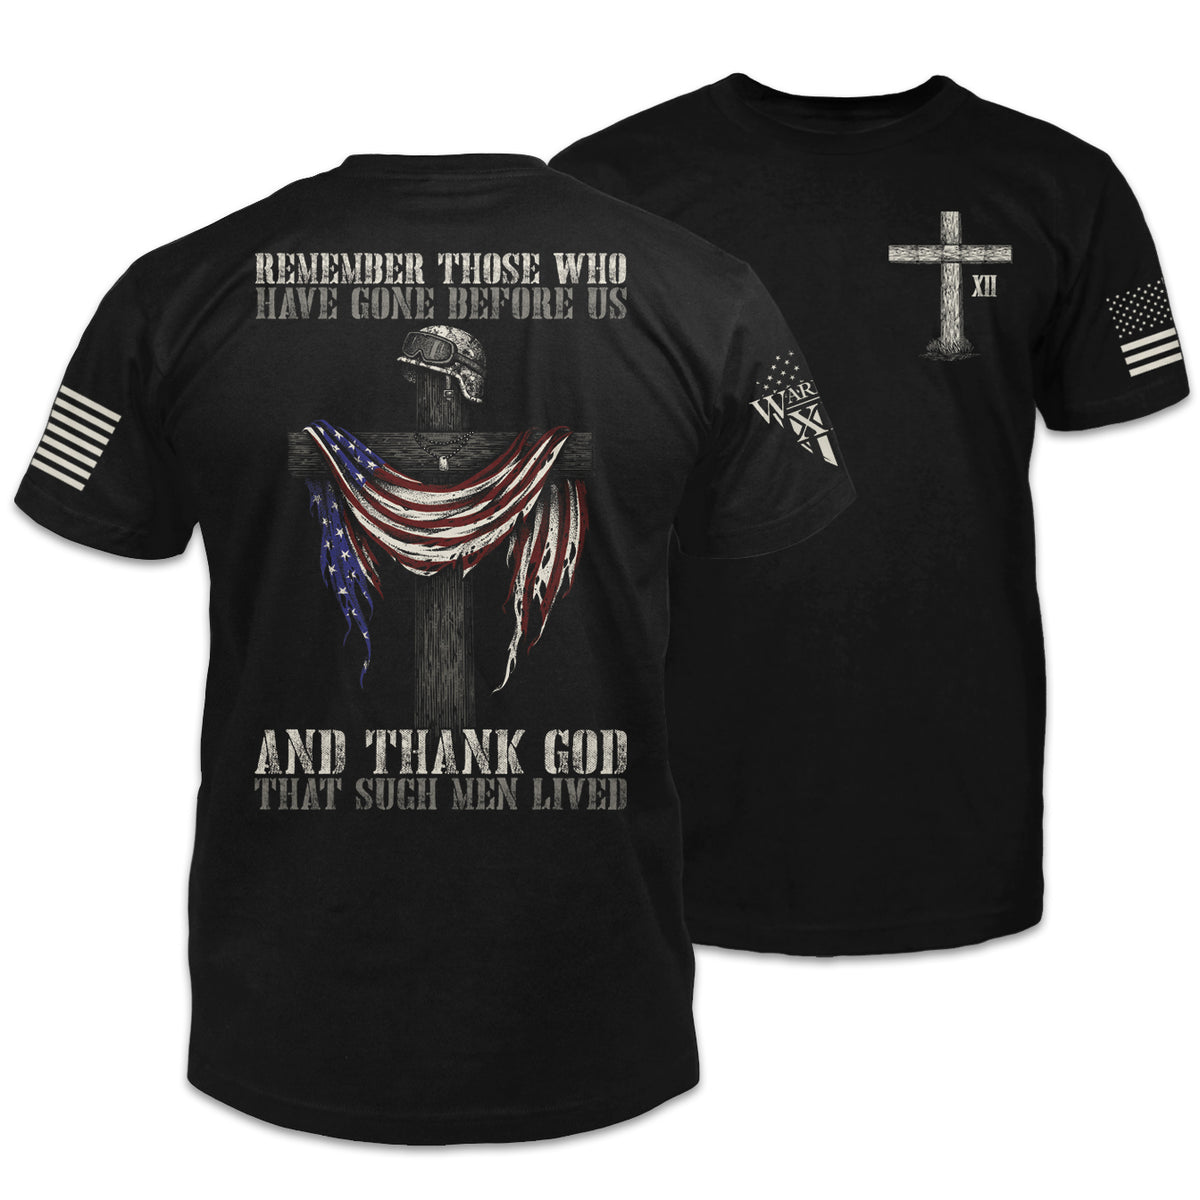 Front & back black t-shirt with the words "Remember those who have gone before us, and thank God that such men lived" with a cross holding a helmet and American flag printed on the shirt.